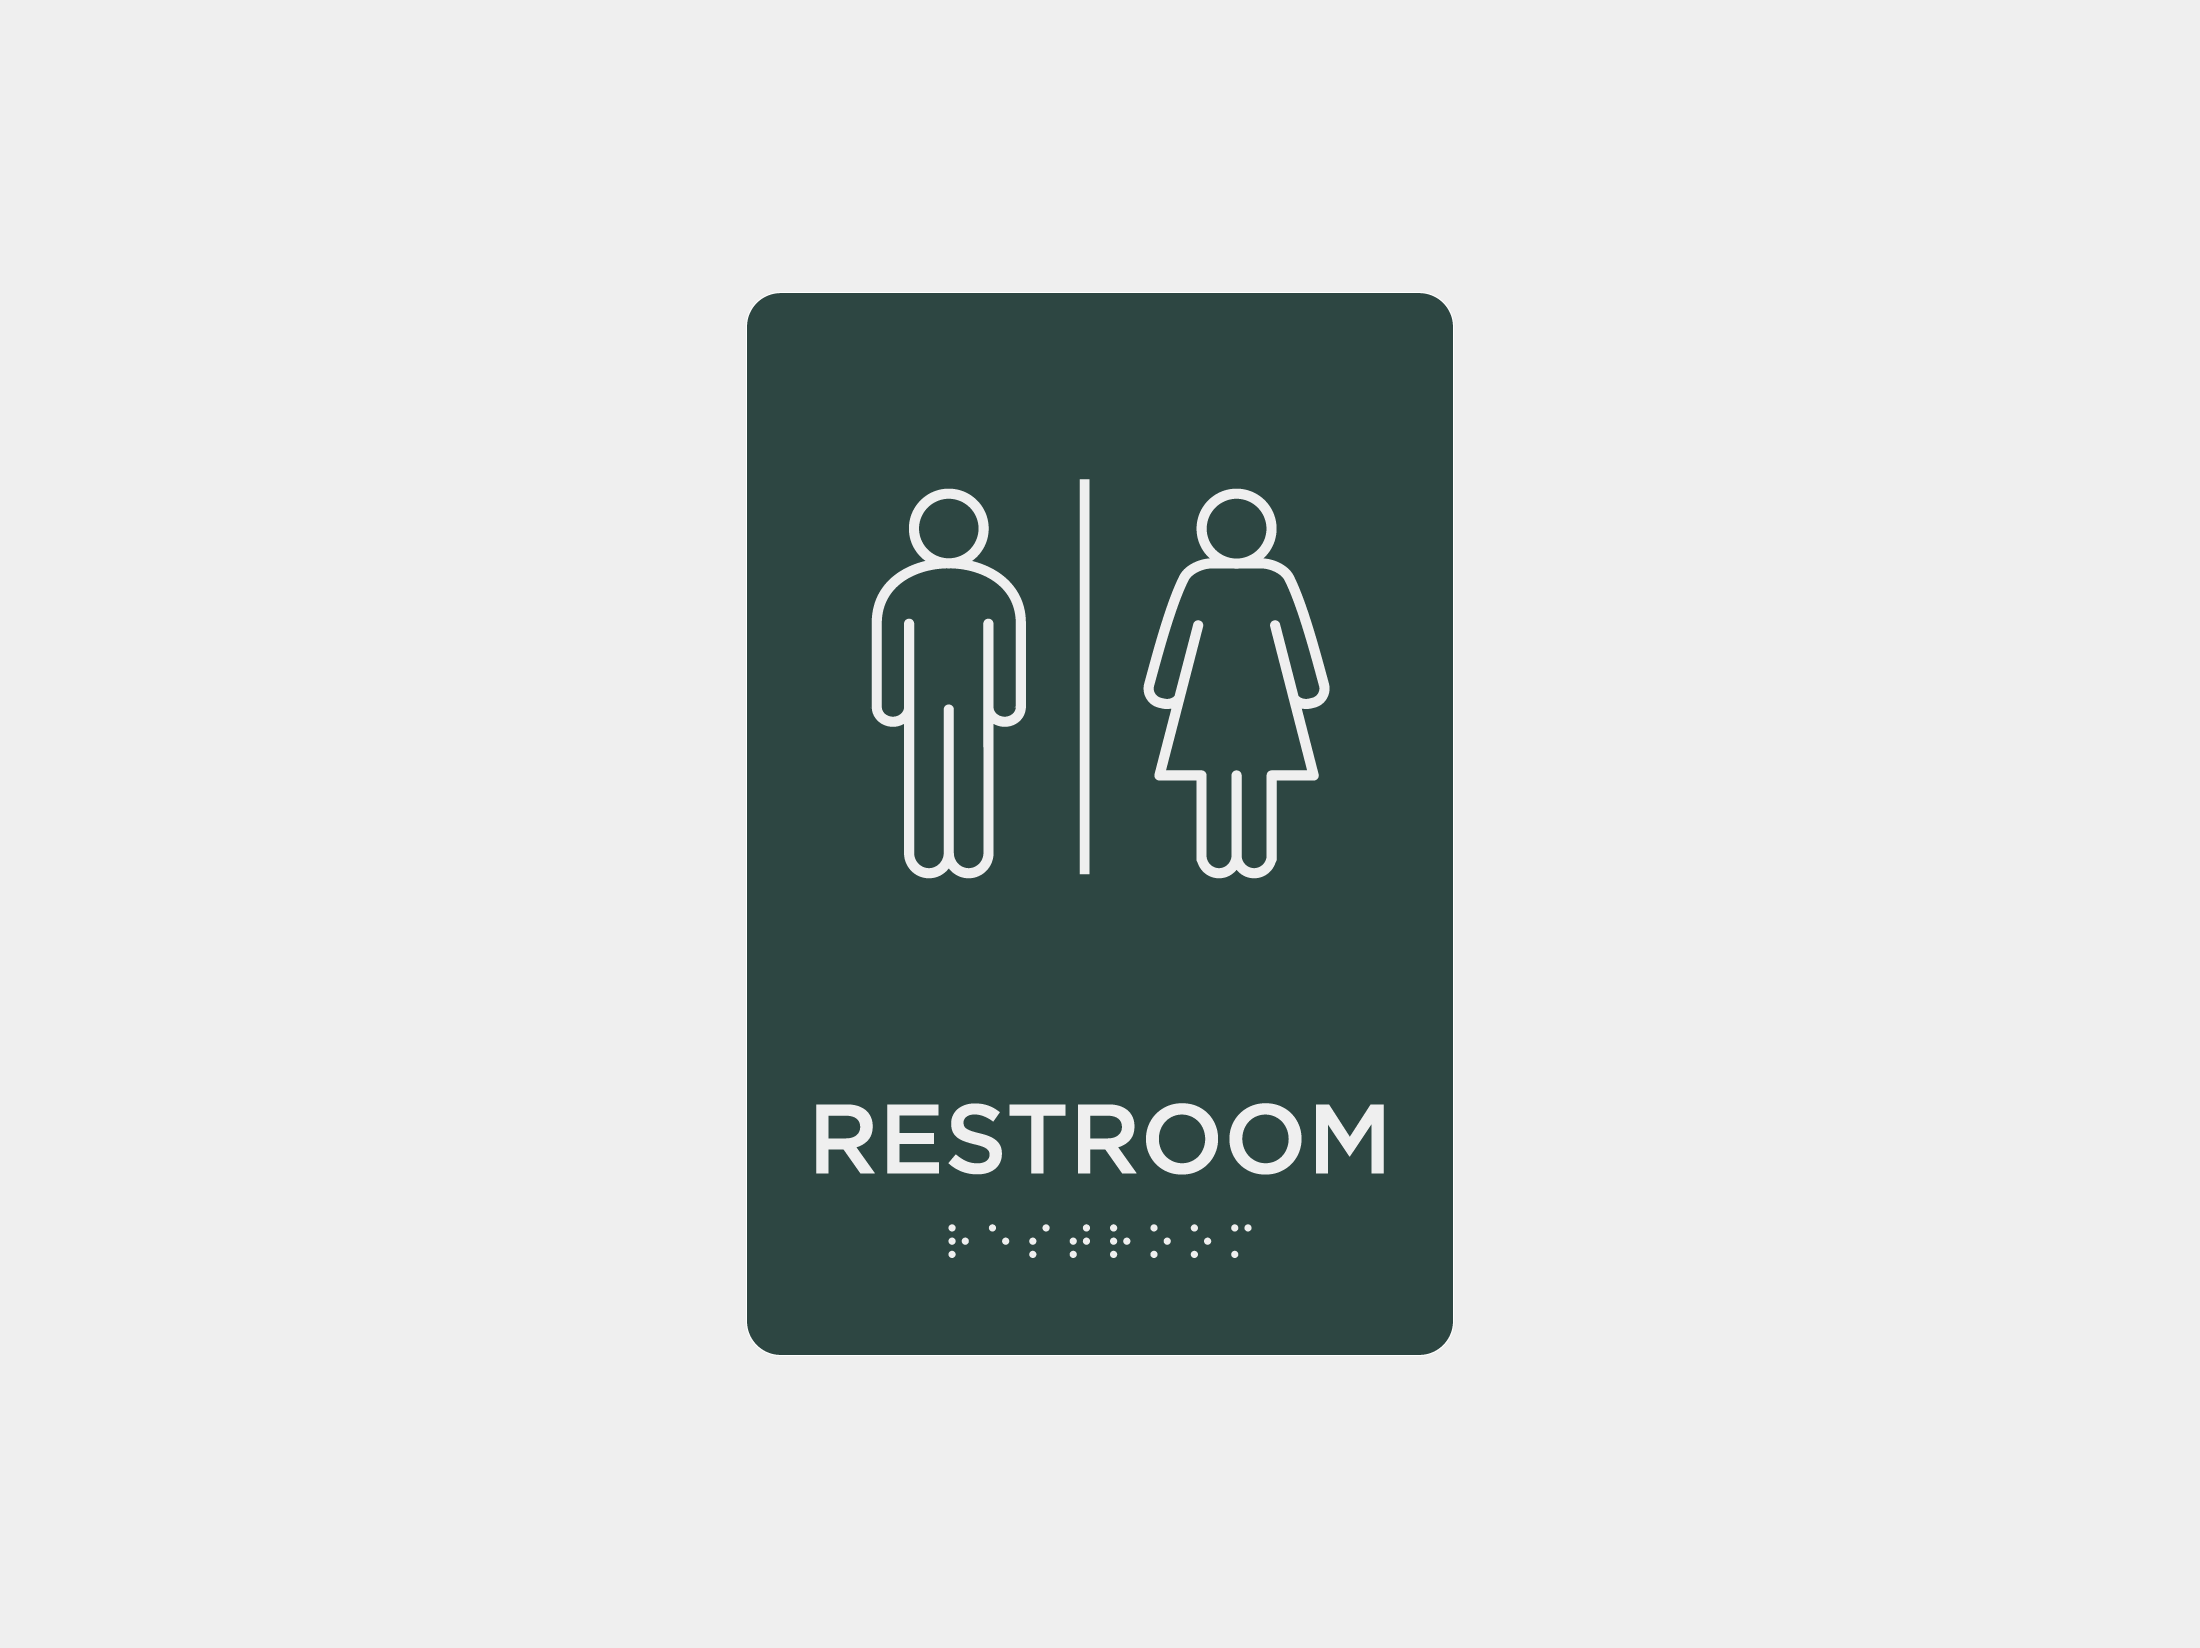 ADA Signs - Restroom Pictogram and Typeset Braille